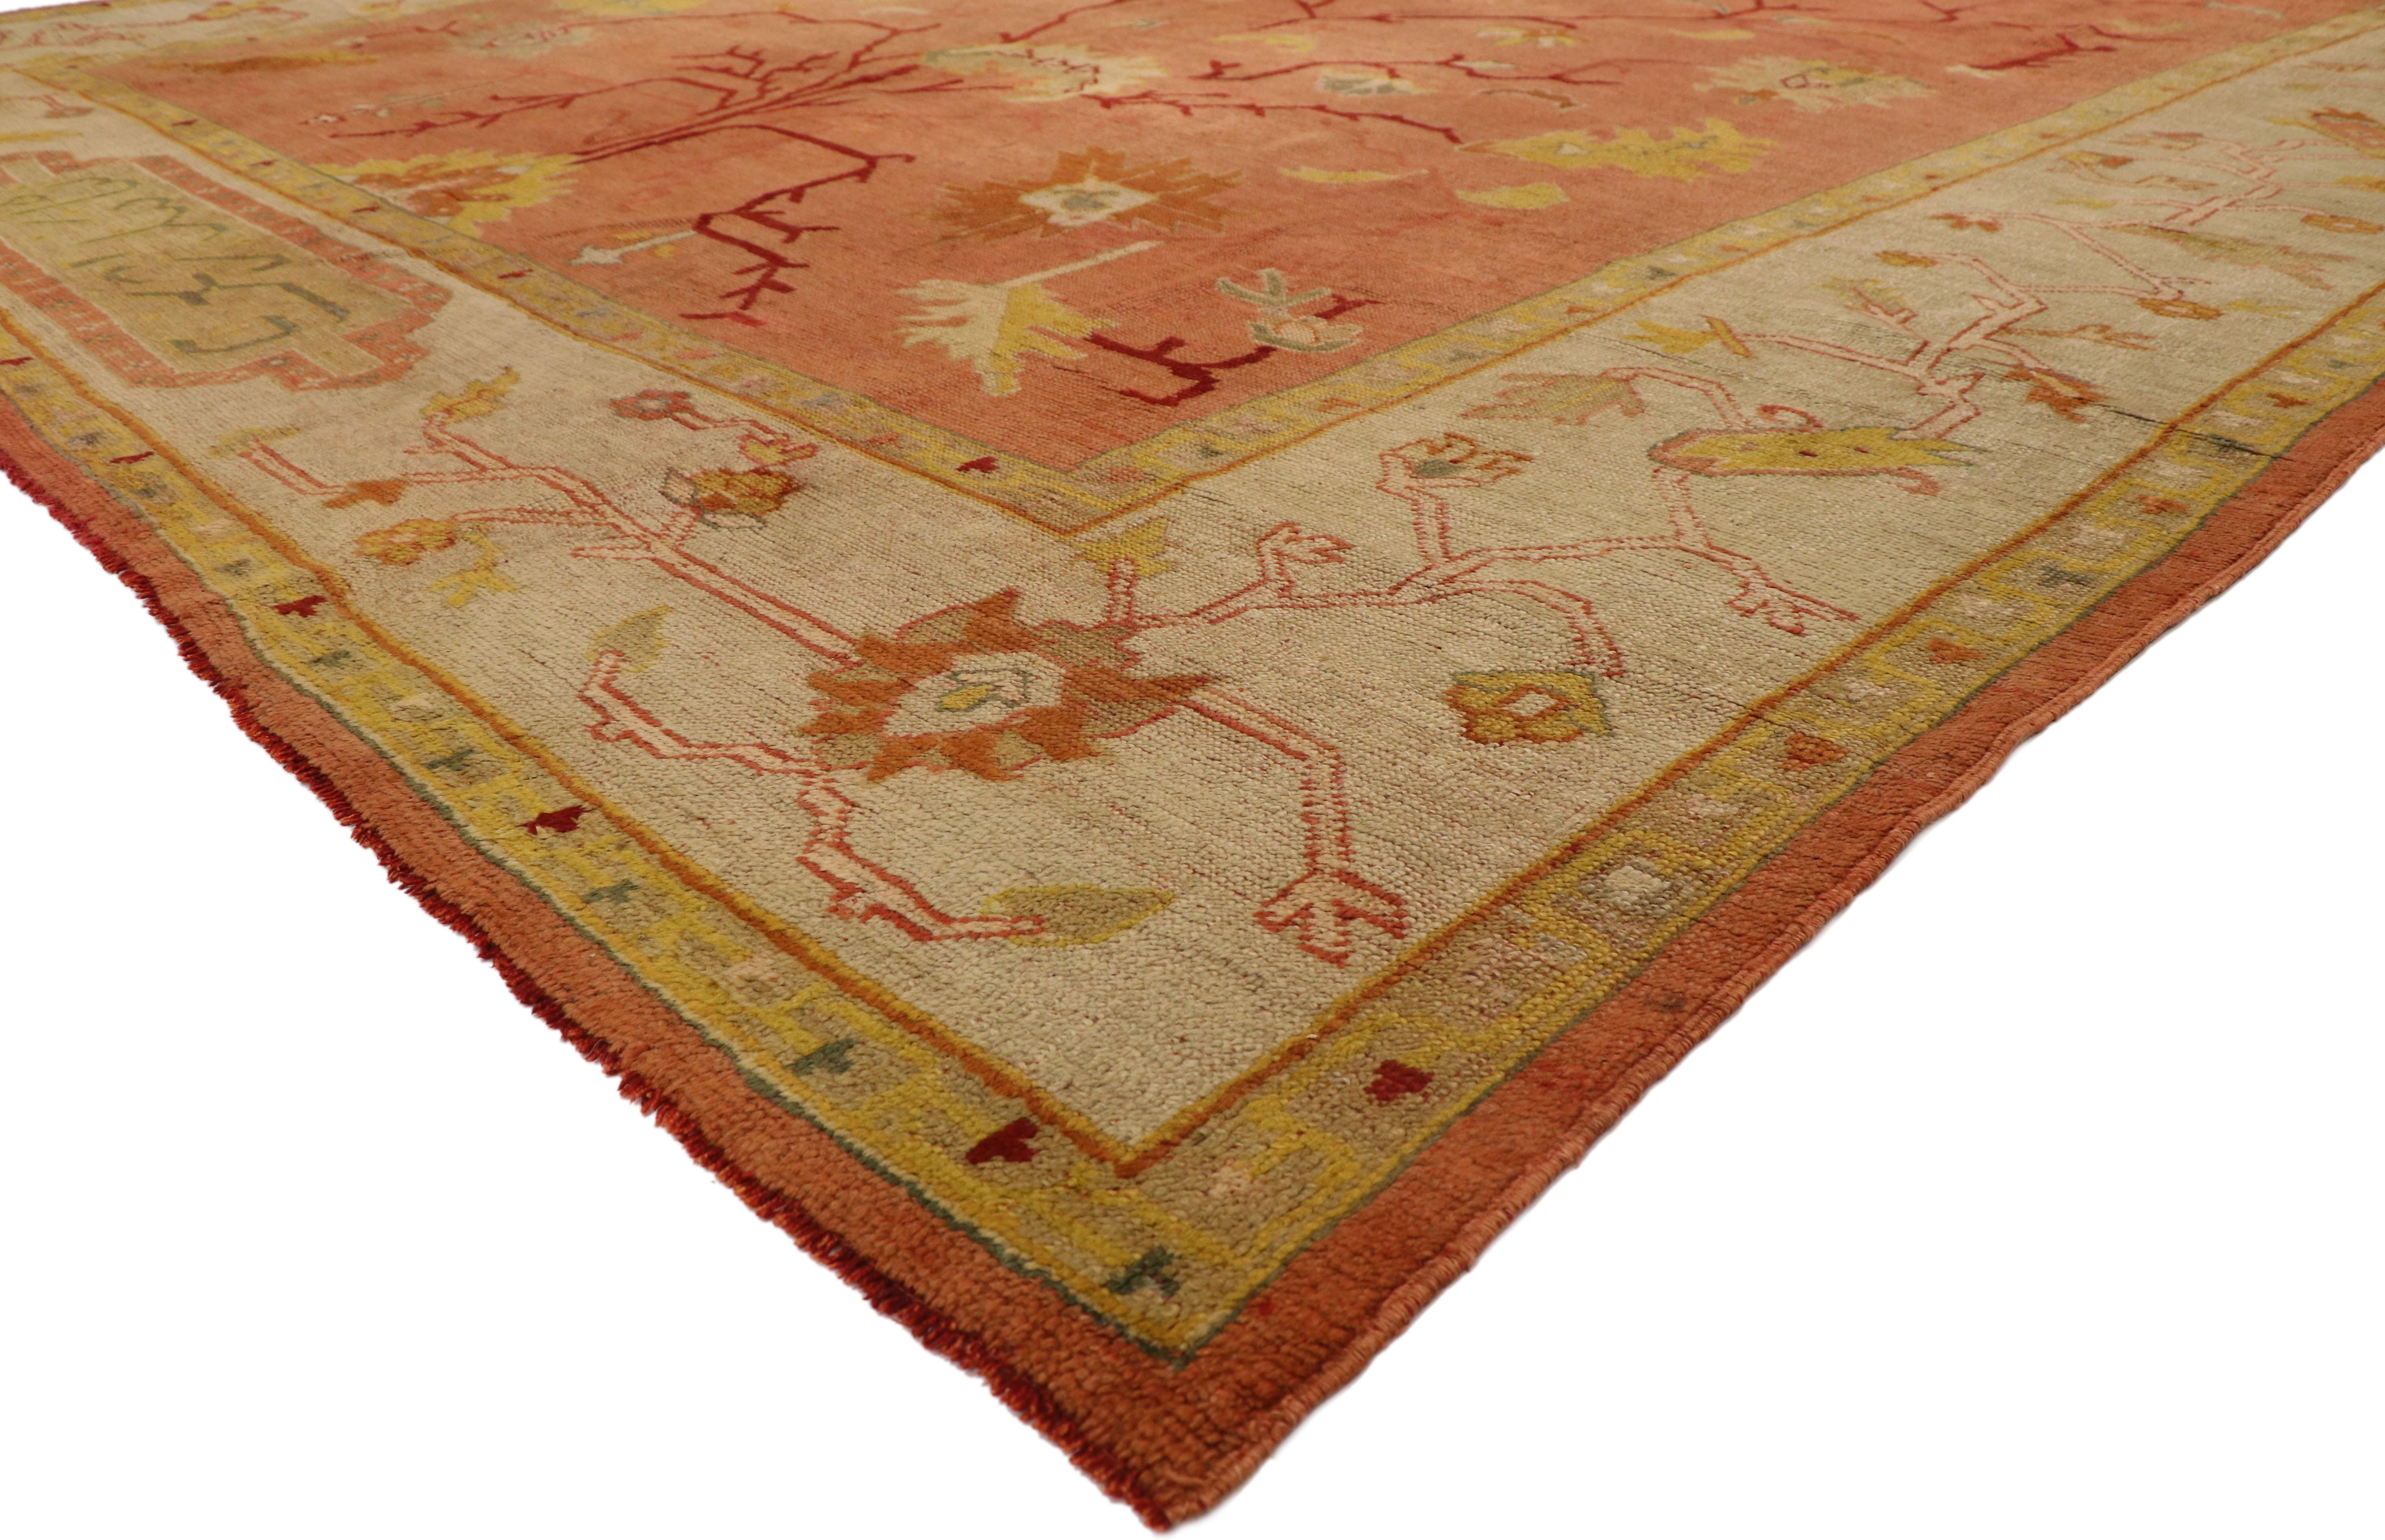 77092, antique Turkish Oushak Rug with with tree of life design and Mediterranean style. Showcasing a directional layout and beguiling beauty, this hand knotted wool antique Turkish Oushak rug imparts a sense of warmth and welcomed informality.It